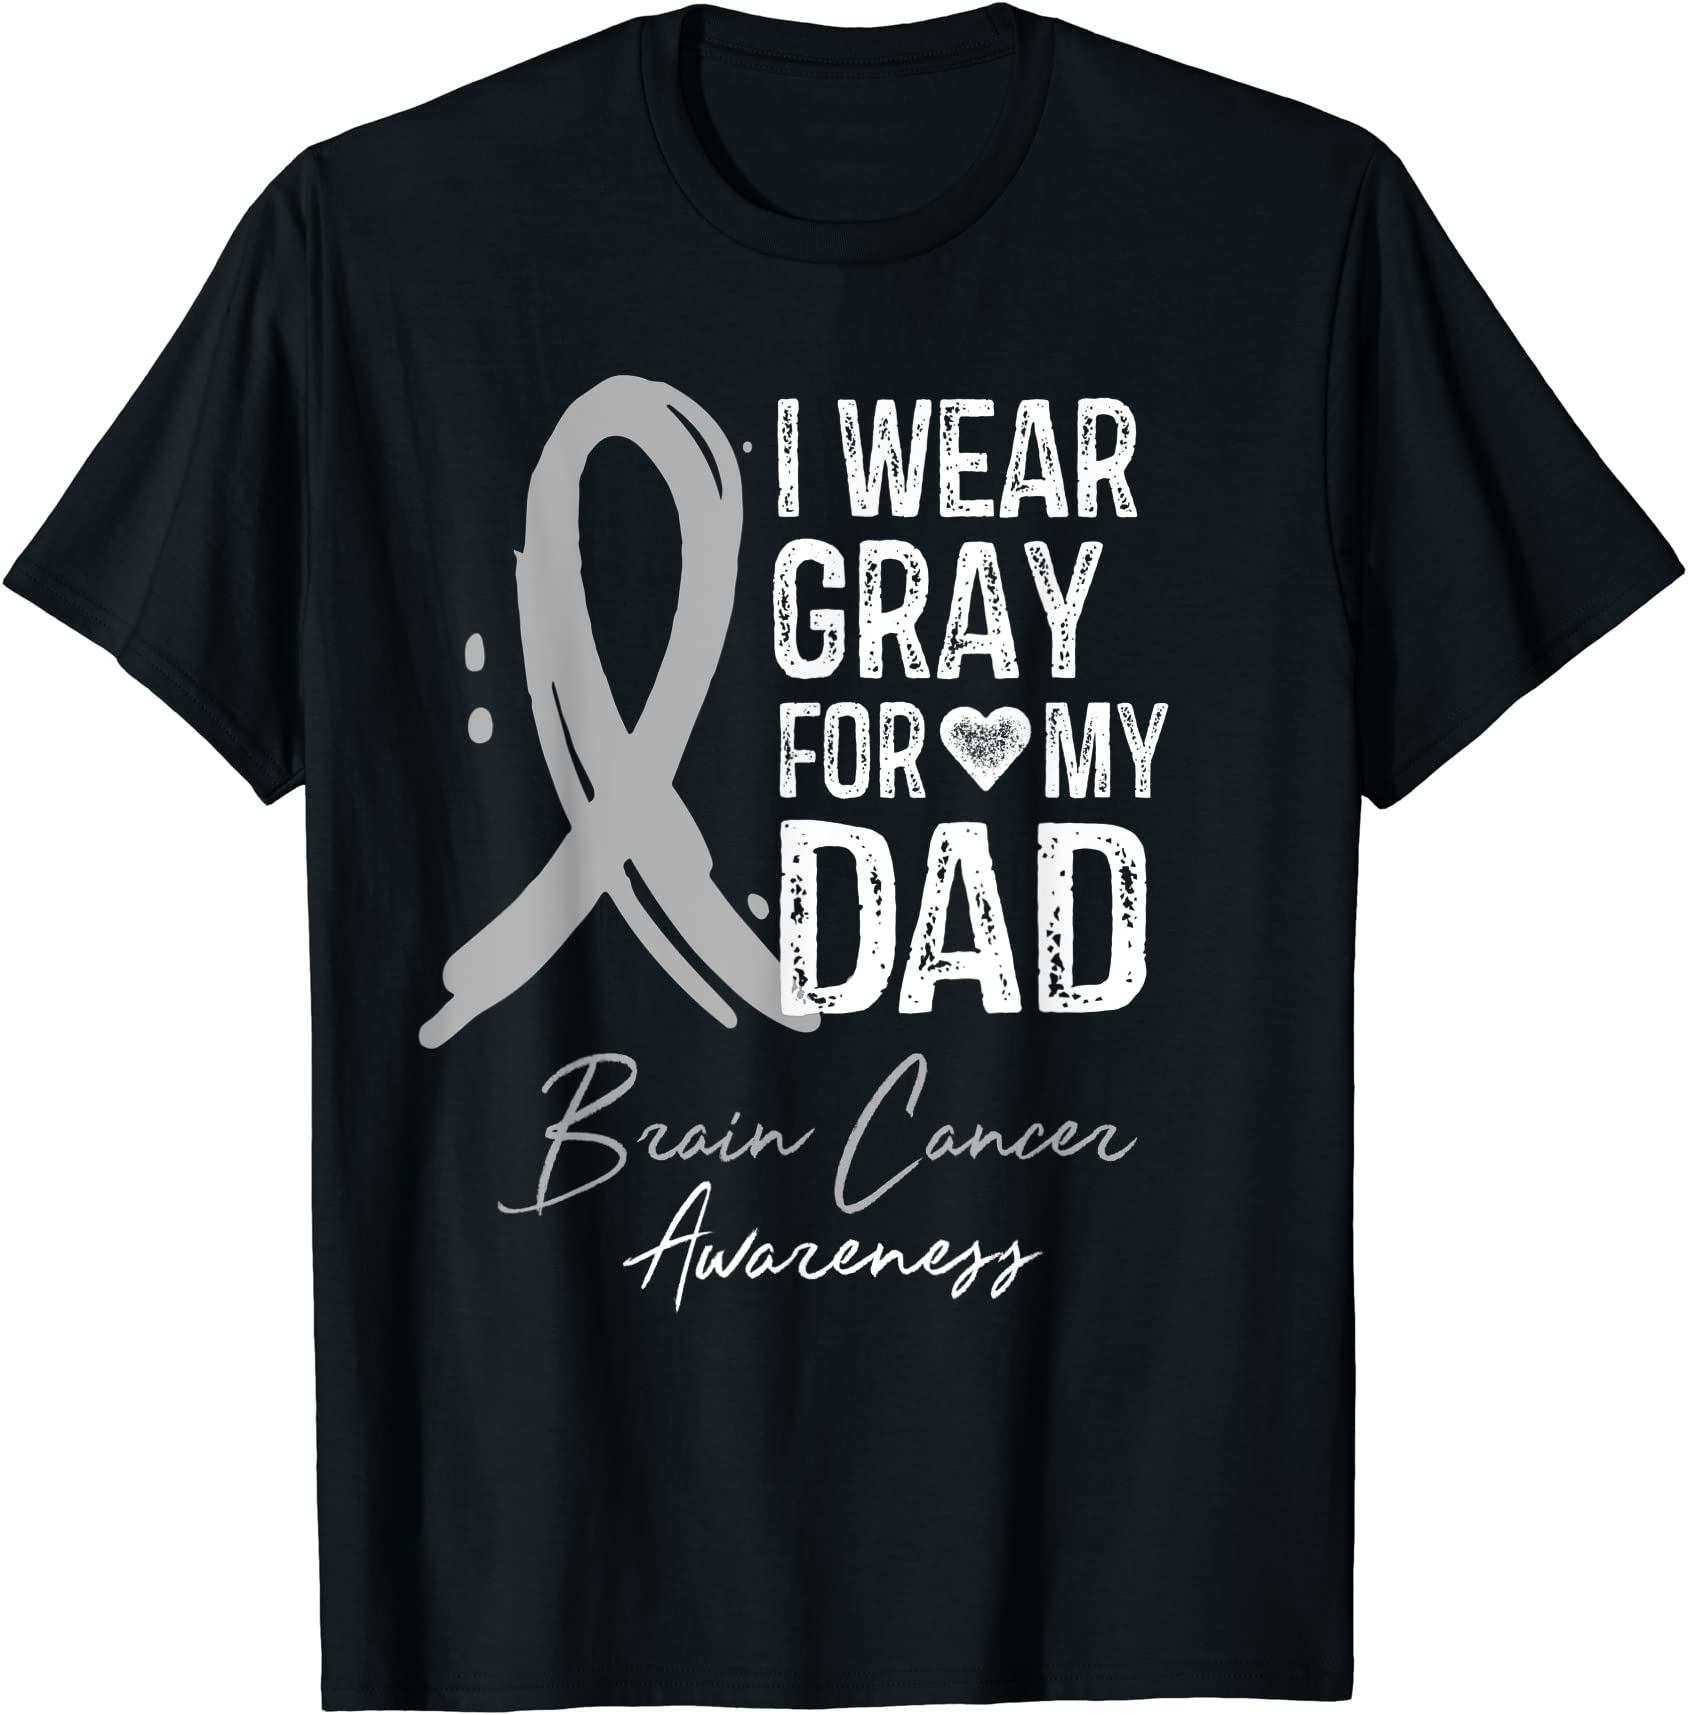 i wear gray for my dad shirt brain cancer awareness gift men - Buy t ...